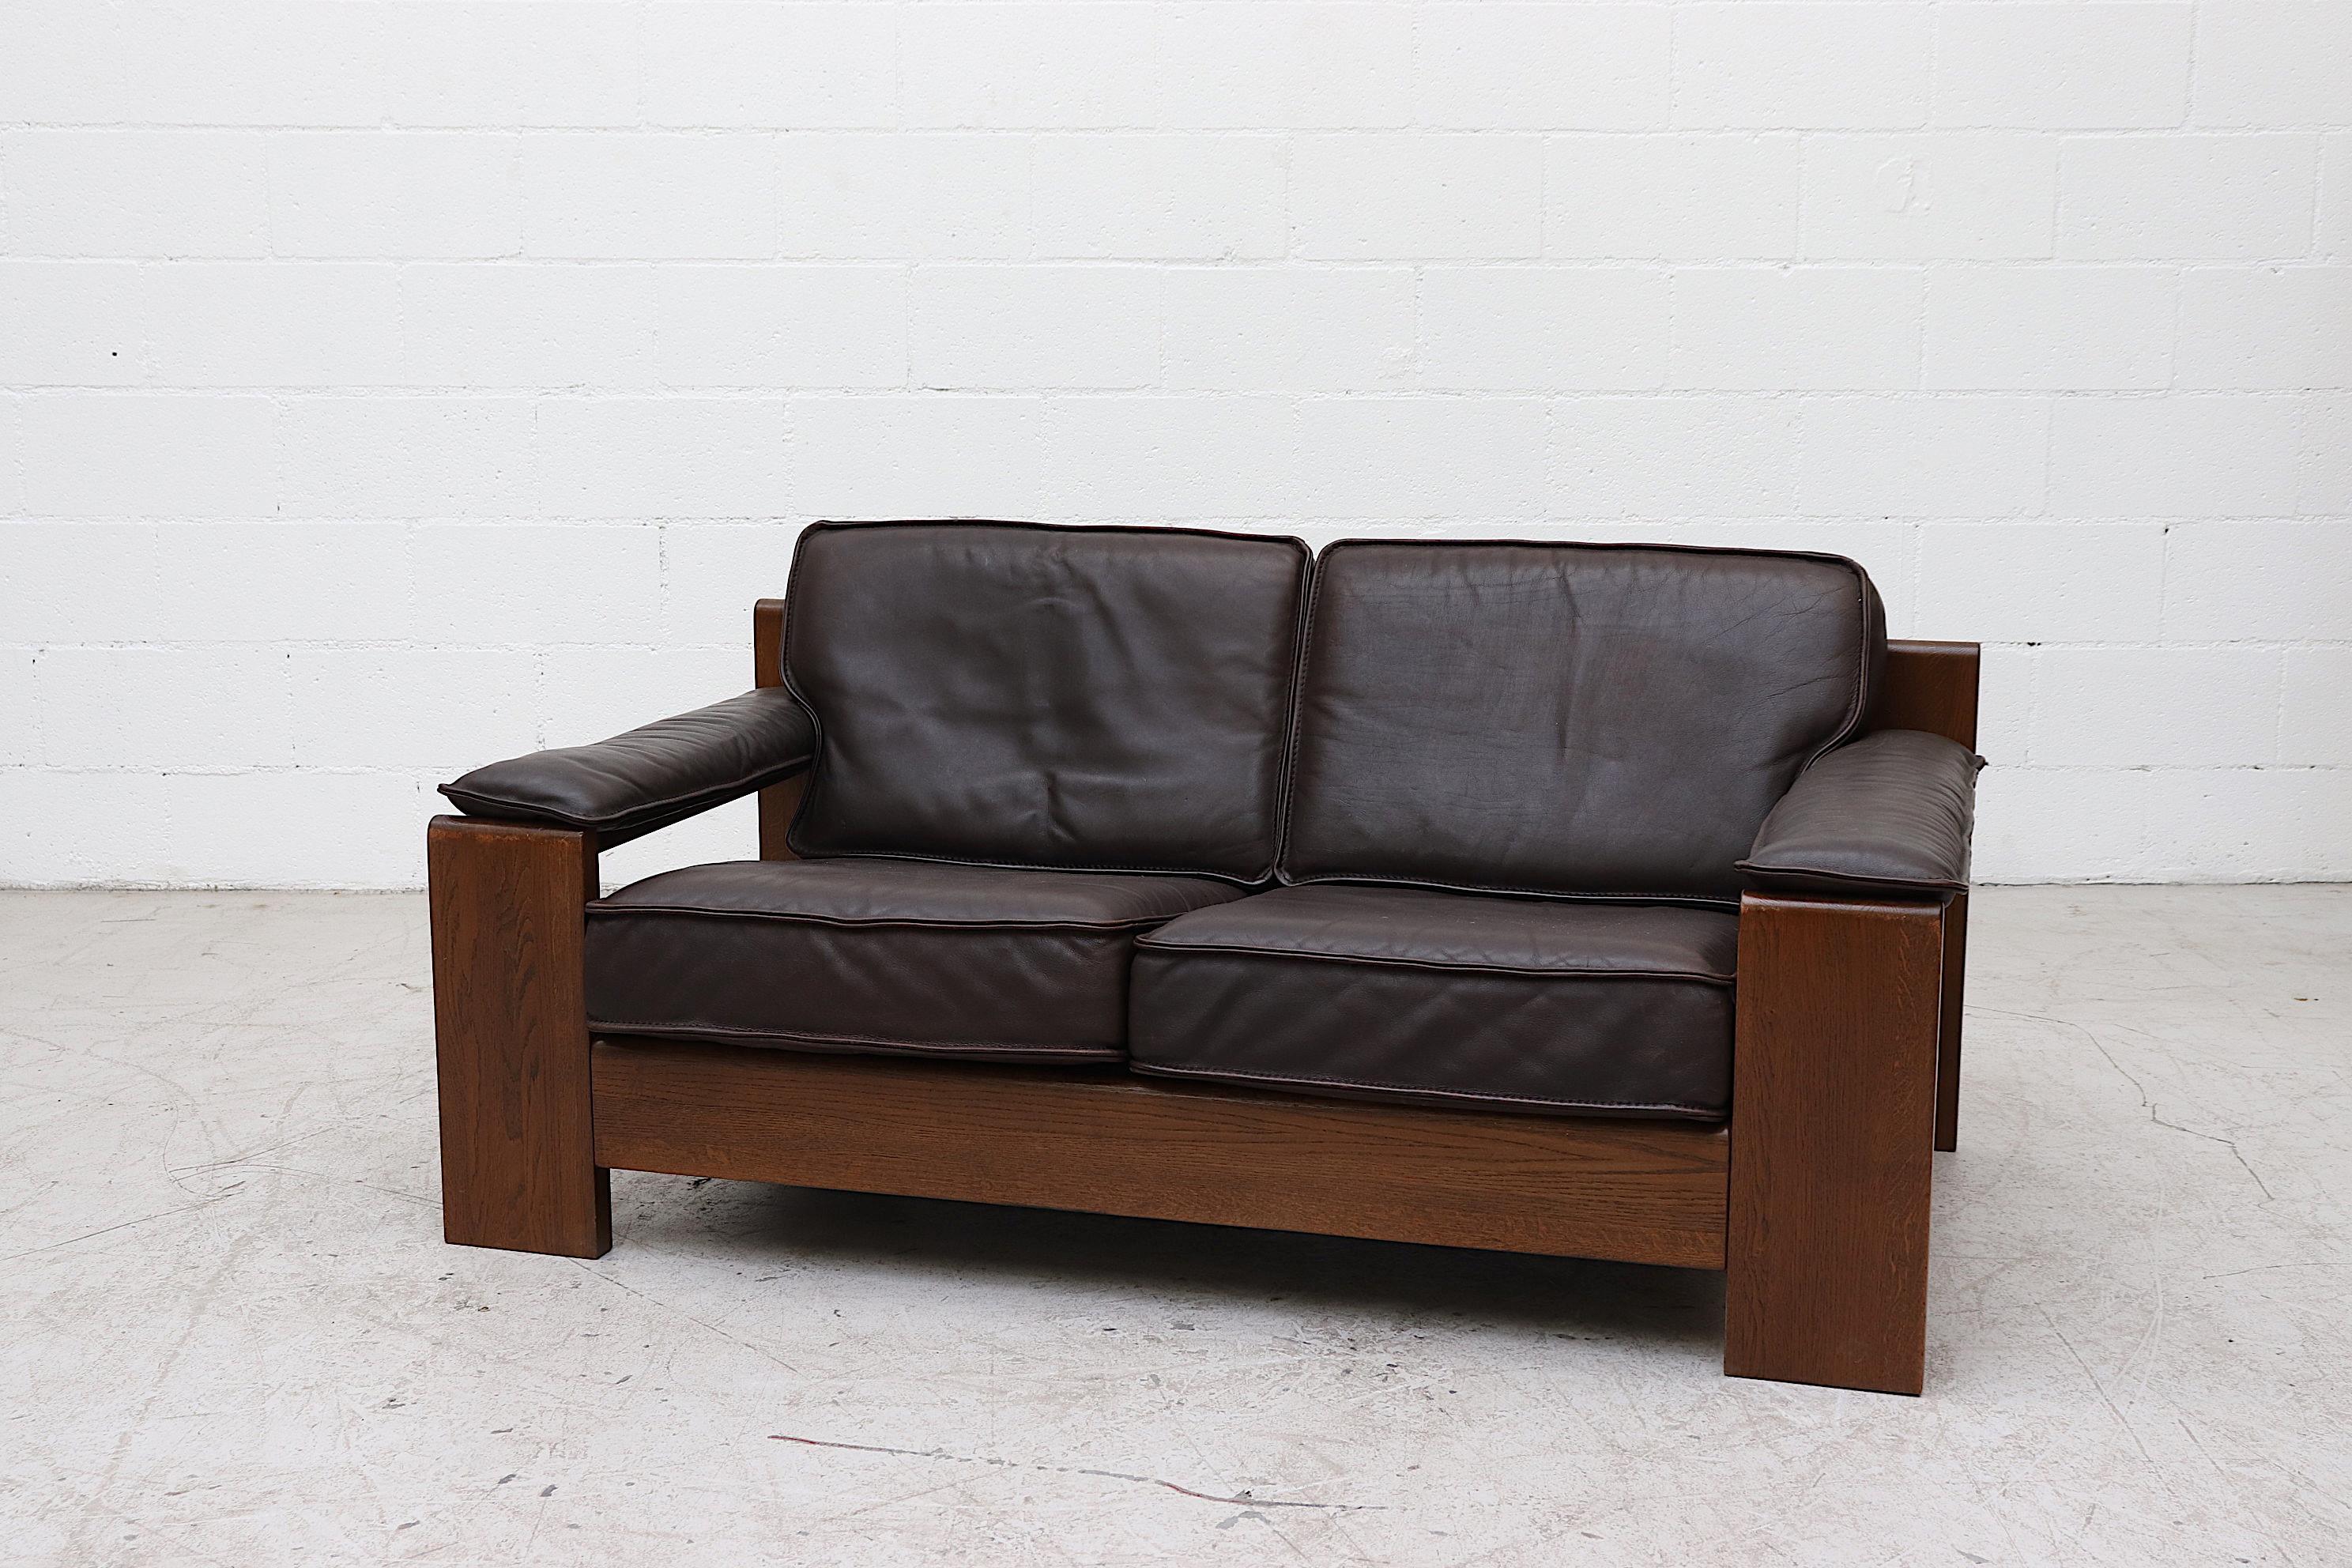 Handsome dark oak framed Leolux loveseat with beautifully worn espresso leather cushions. Armrests snap on, a snap may be missing on one armrest. In original condition with wear consistent with its age and use. Shot with matching 3-seat sofa